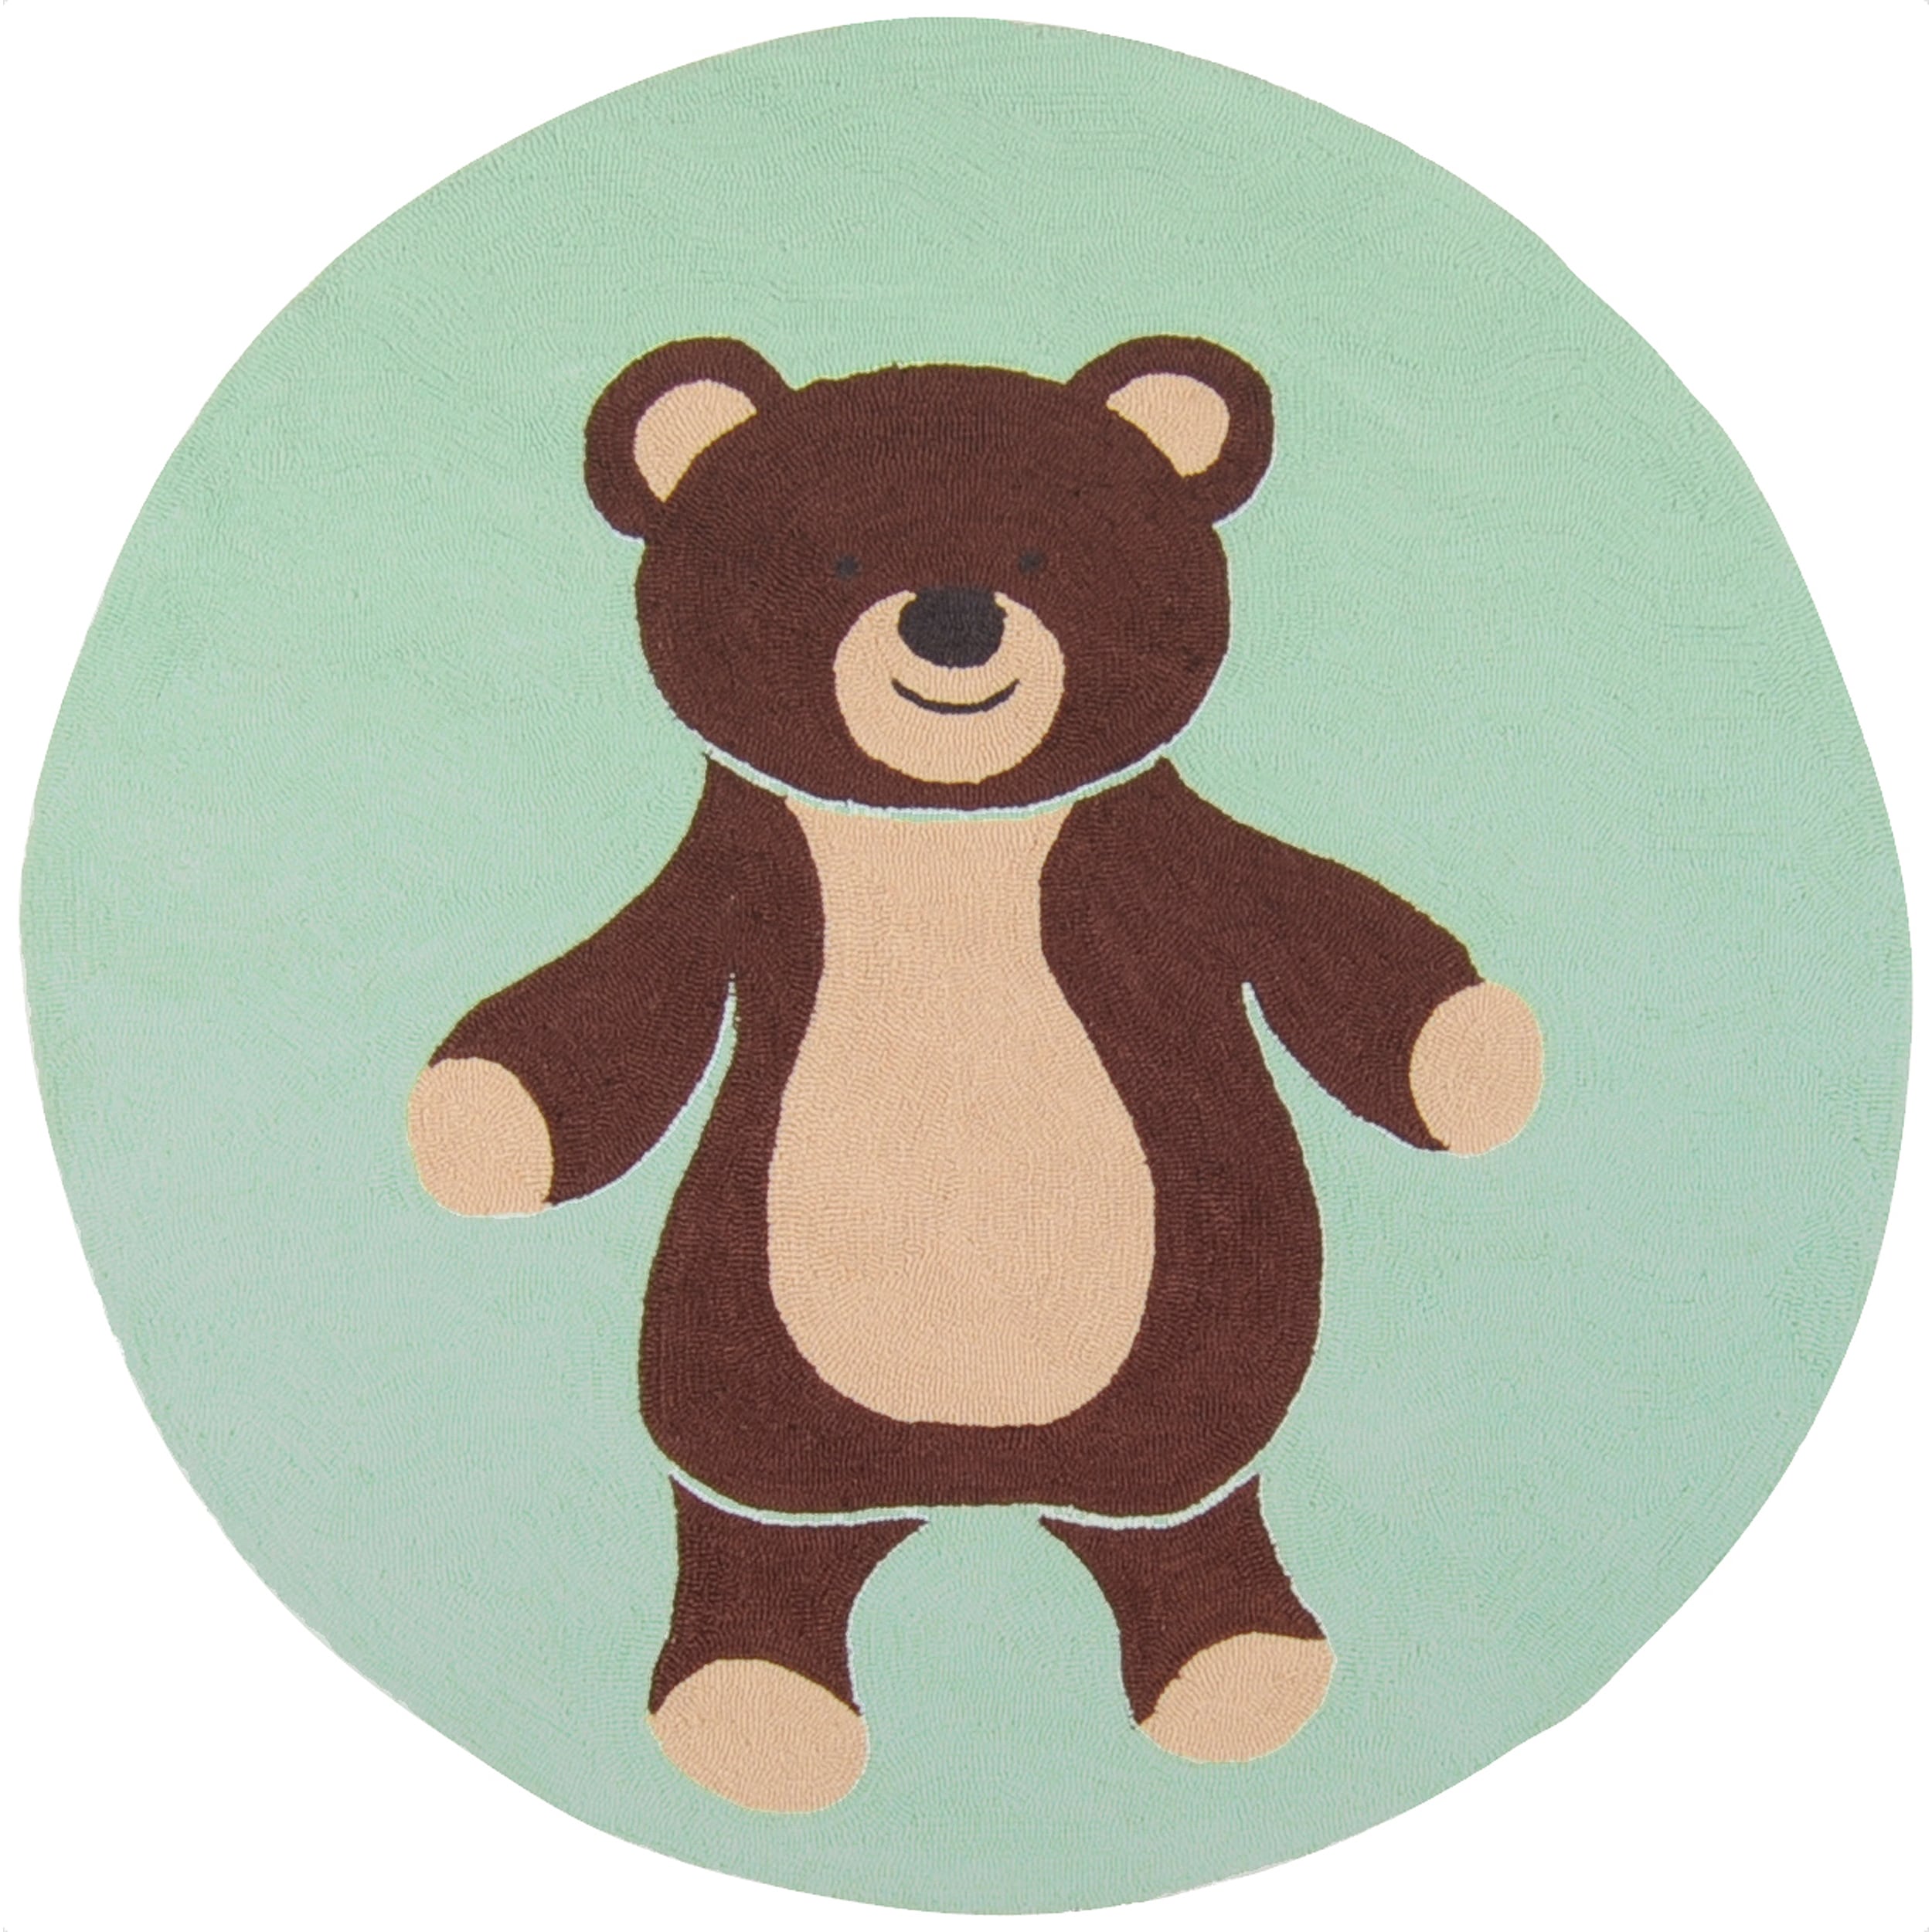 Hand hooked Green/multicolored Bear Portage Rug (8 Round)